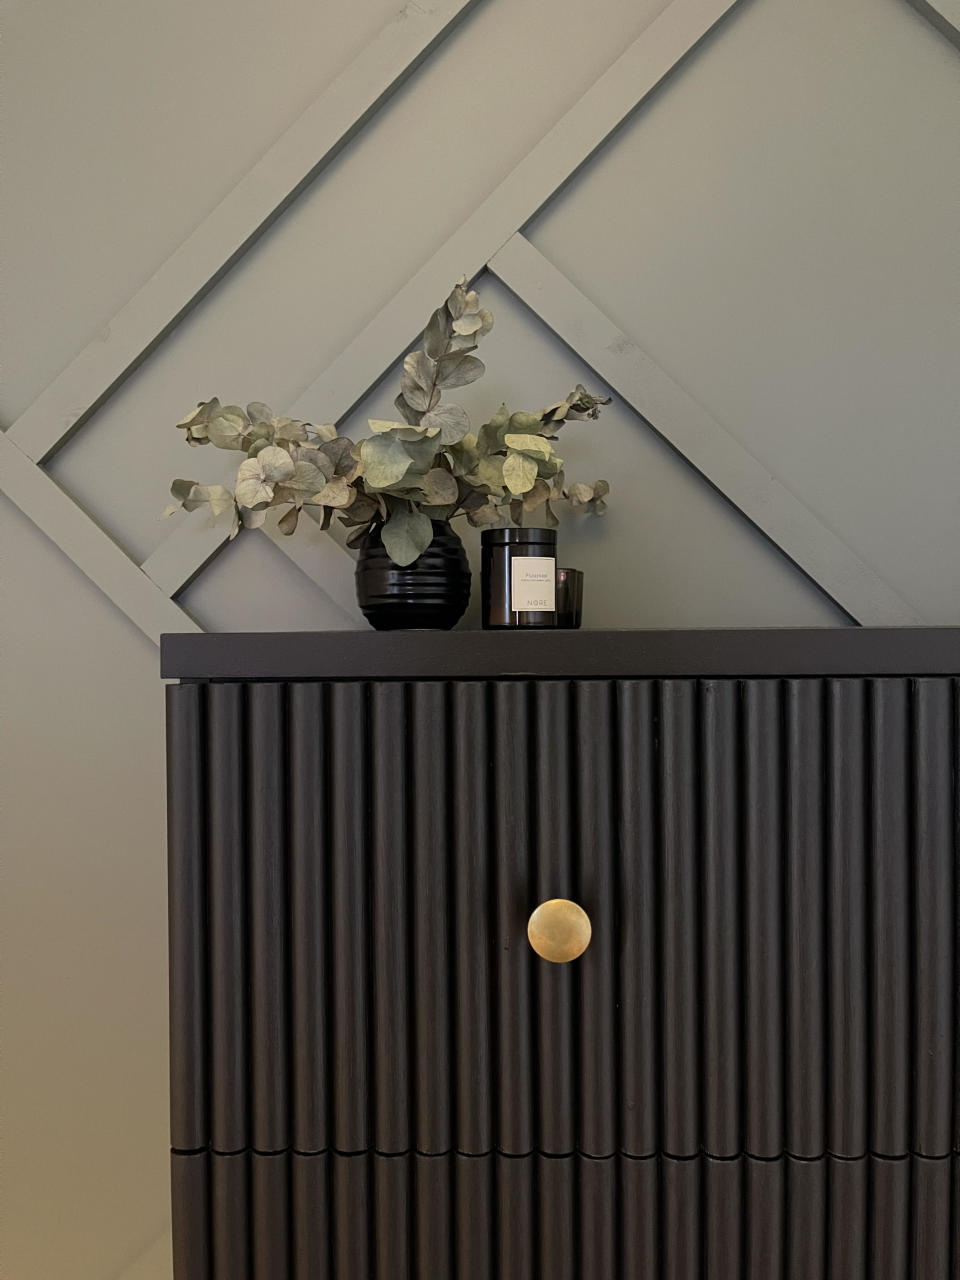 A sideboard in all black, with a fluted exterior and a gold-painted knob